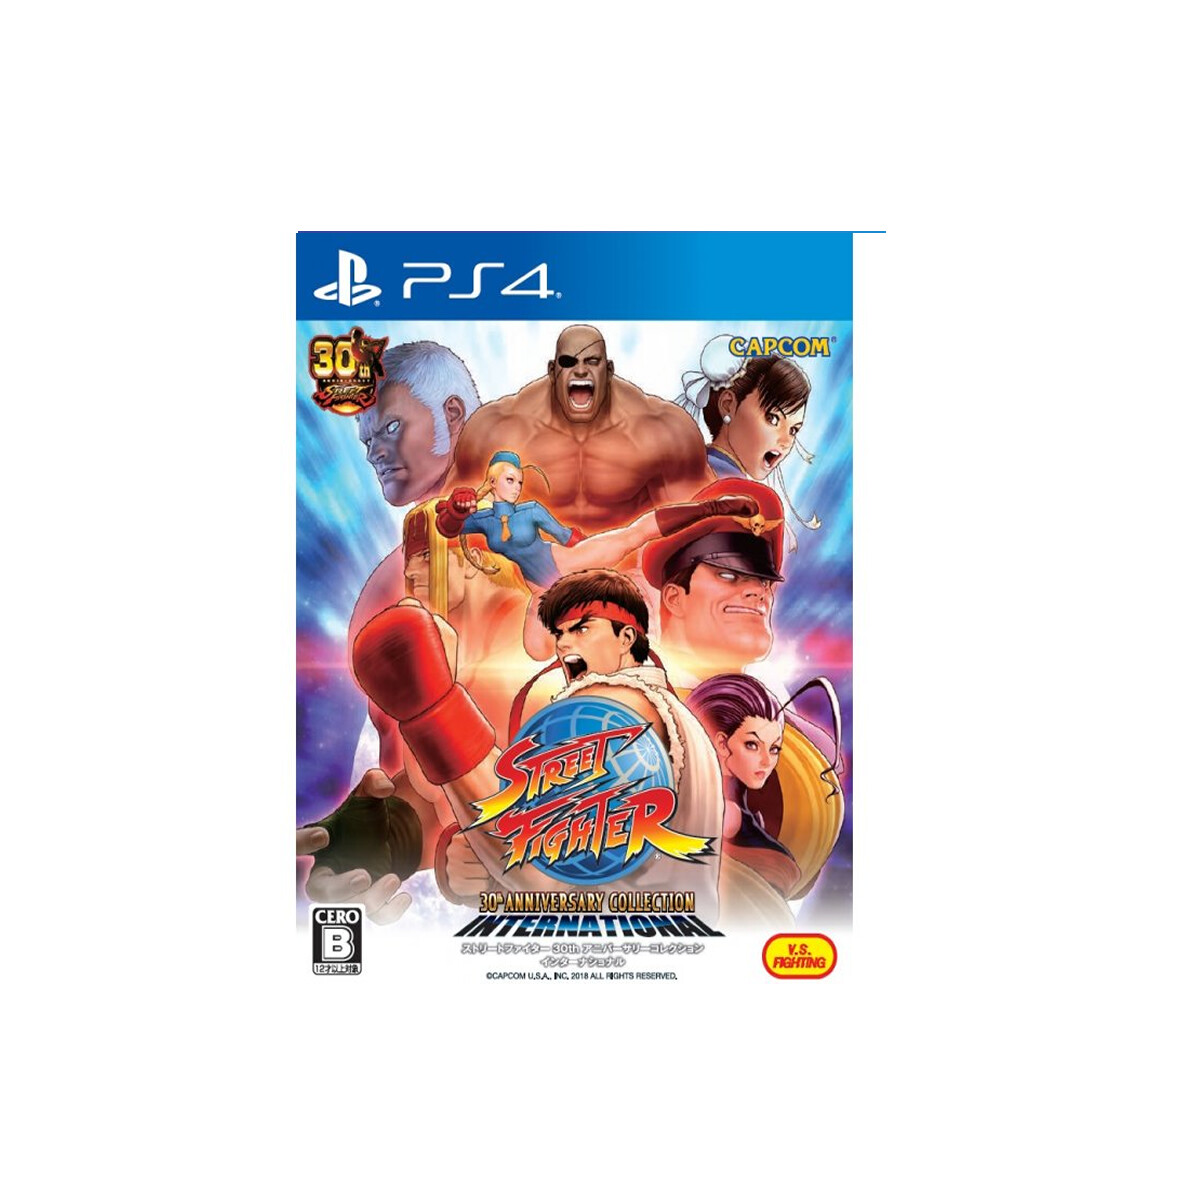 PS4 STREET FIGHTER ANNIVERSARY 